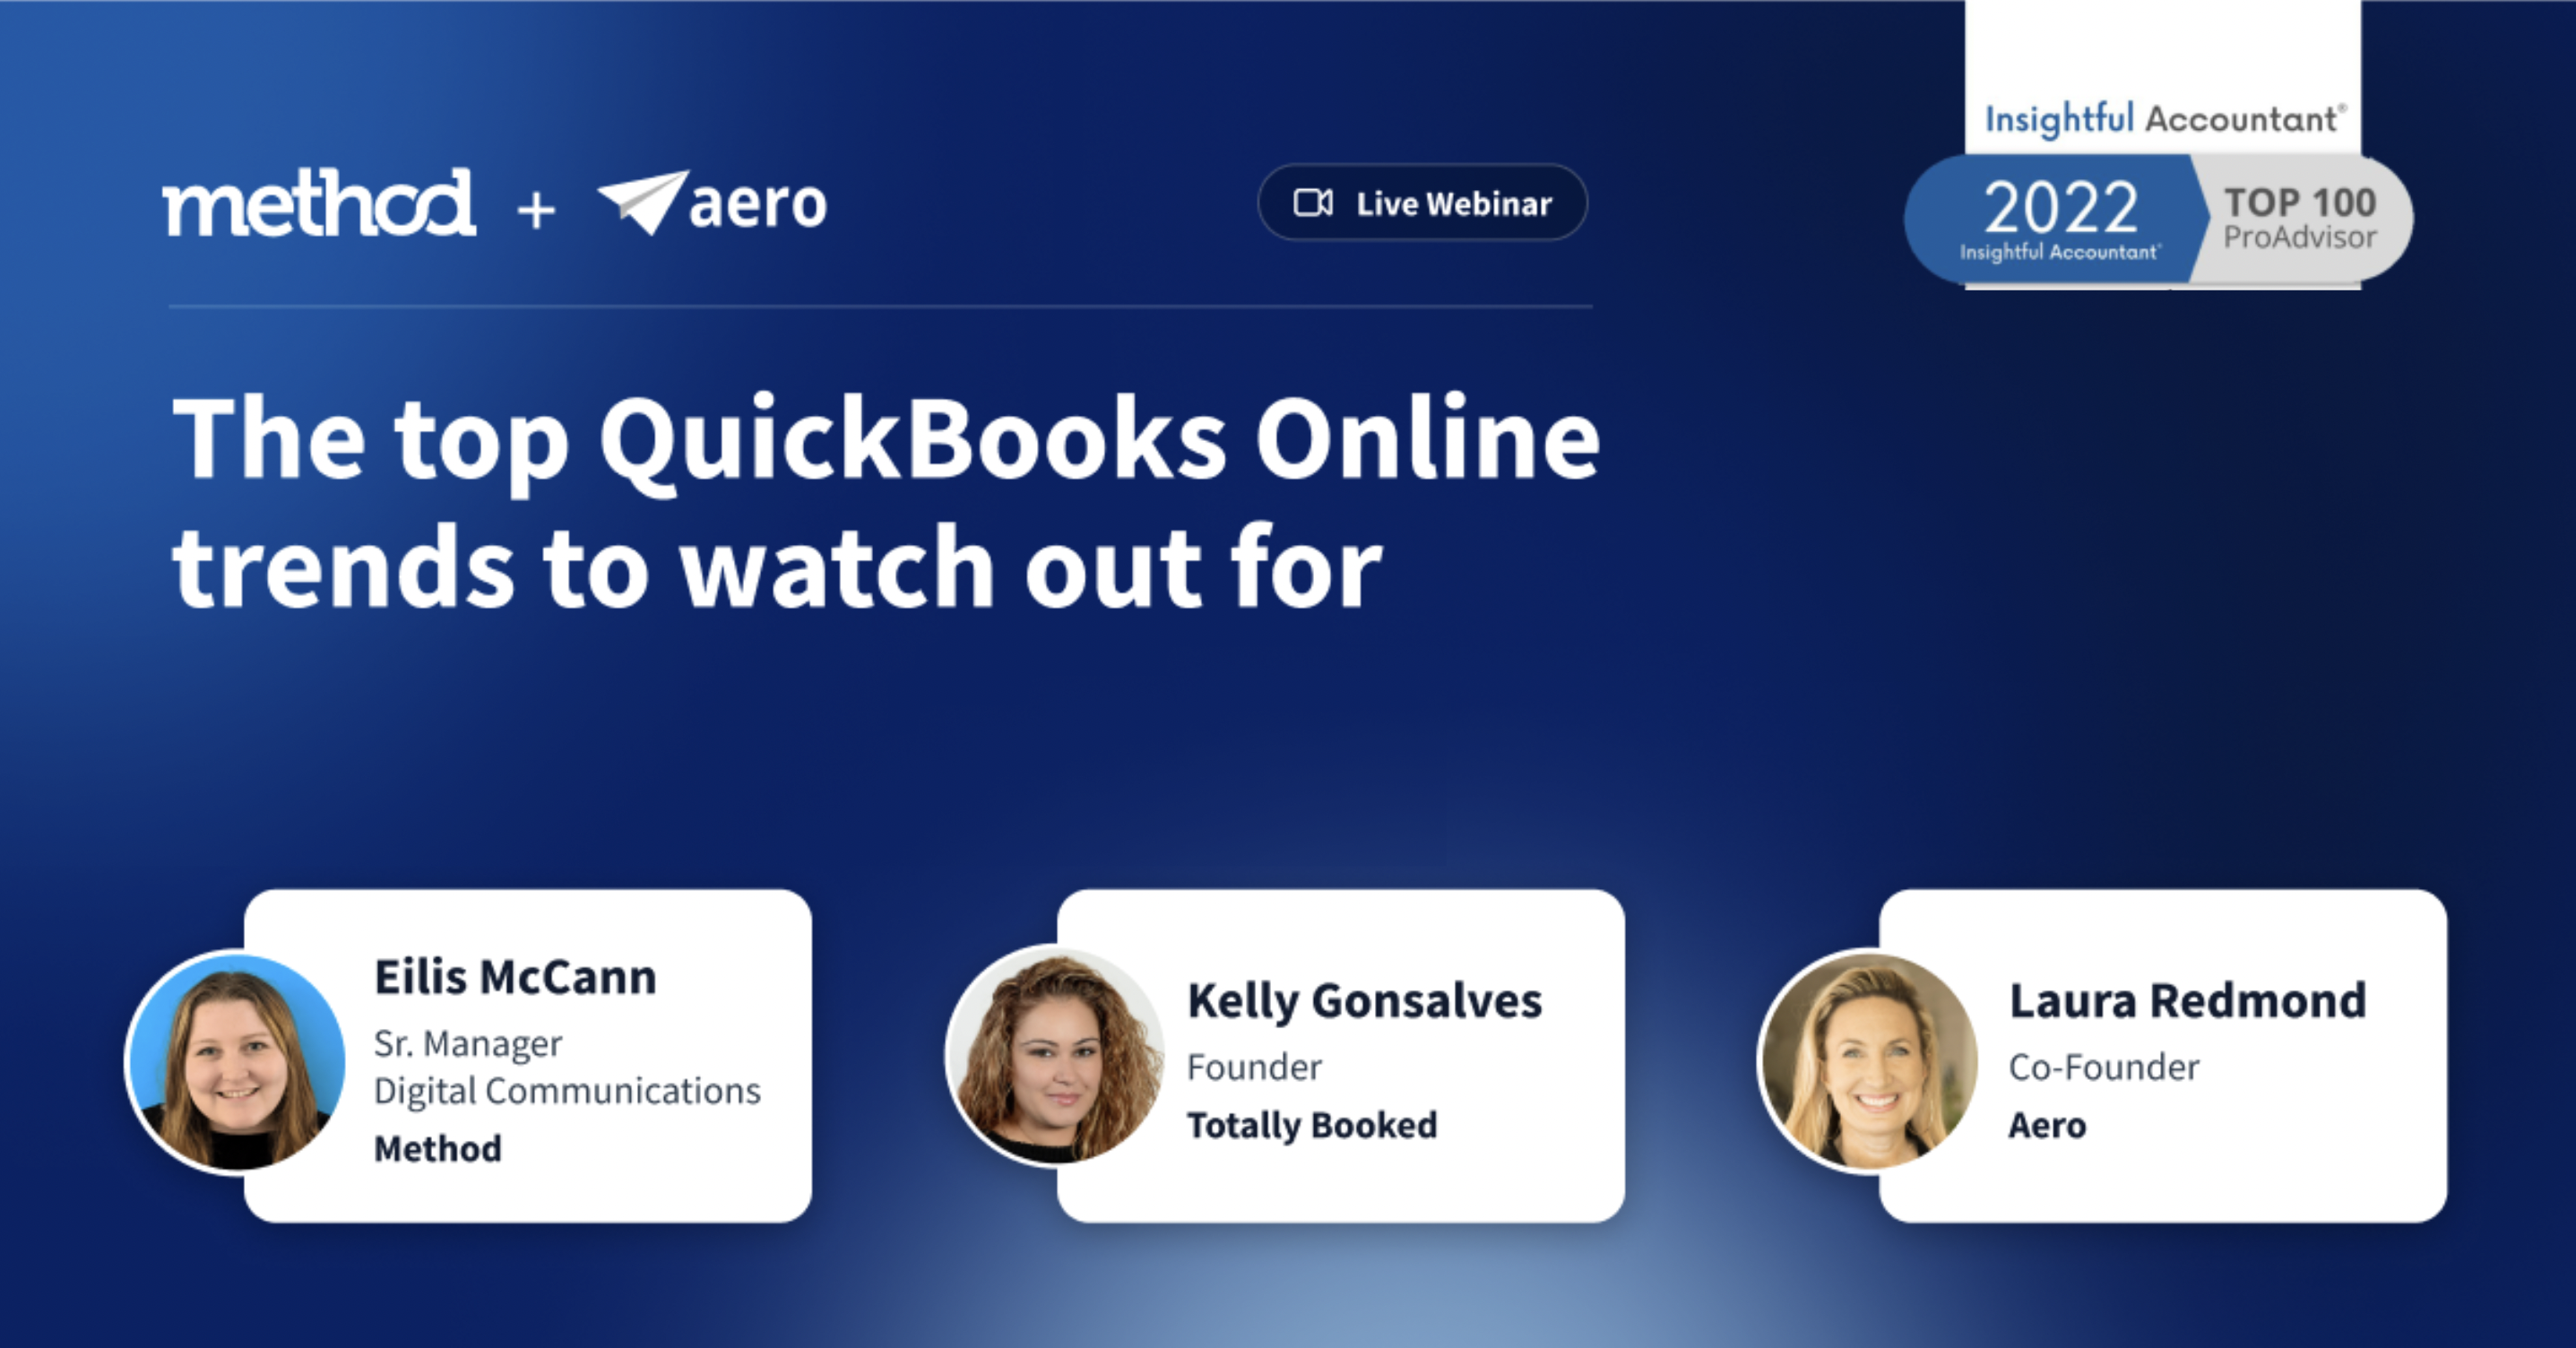 The QuickBooks Online trends to watch out for webinar. Host: Eilis McCann SEO + Content Manager, Method. Panel of Insightful Accountant's top 100 ProAdvisors: Laura Redmond Co-Founder Aero and Kelly Gonsalves, Founder. Totally Booked.